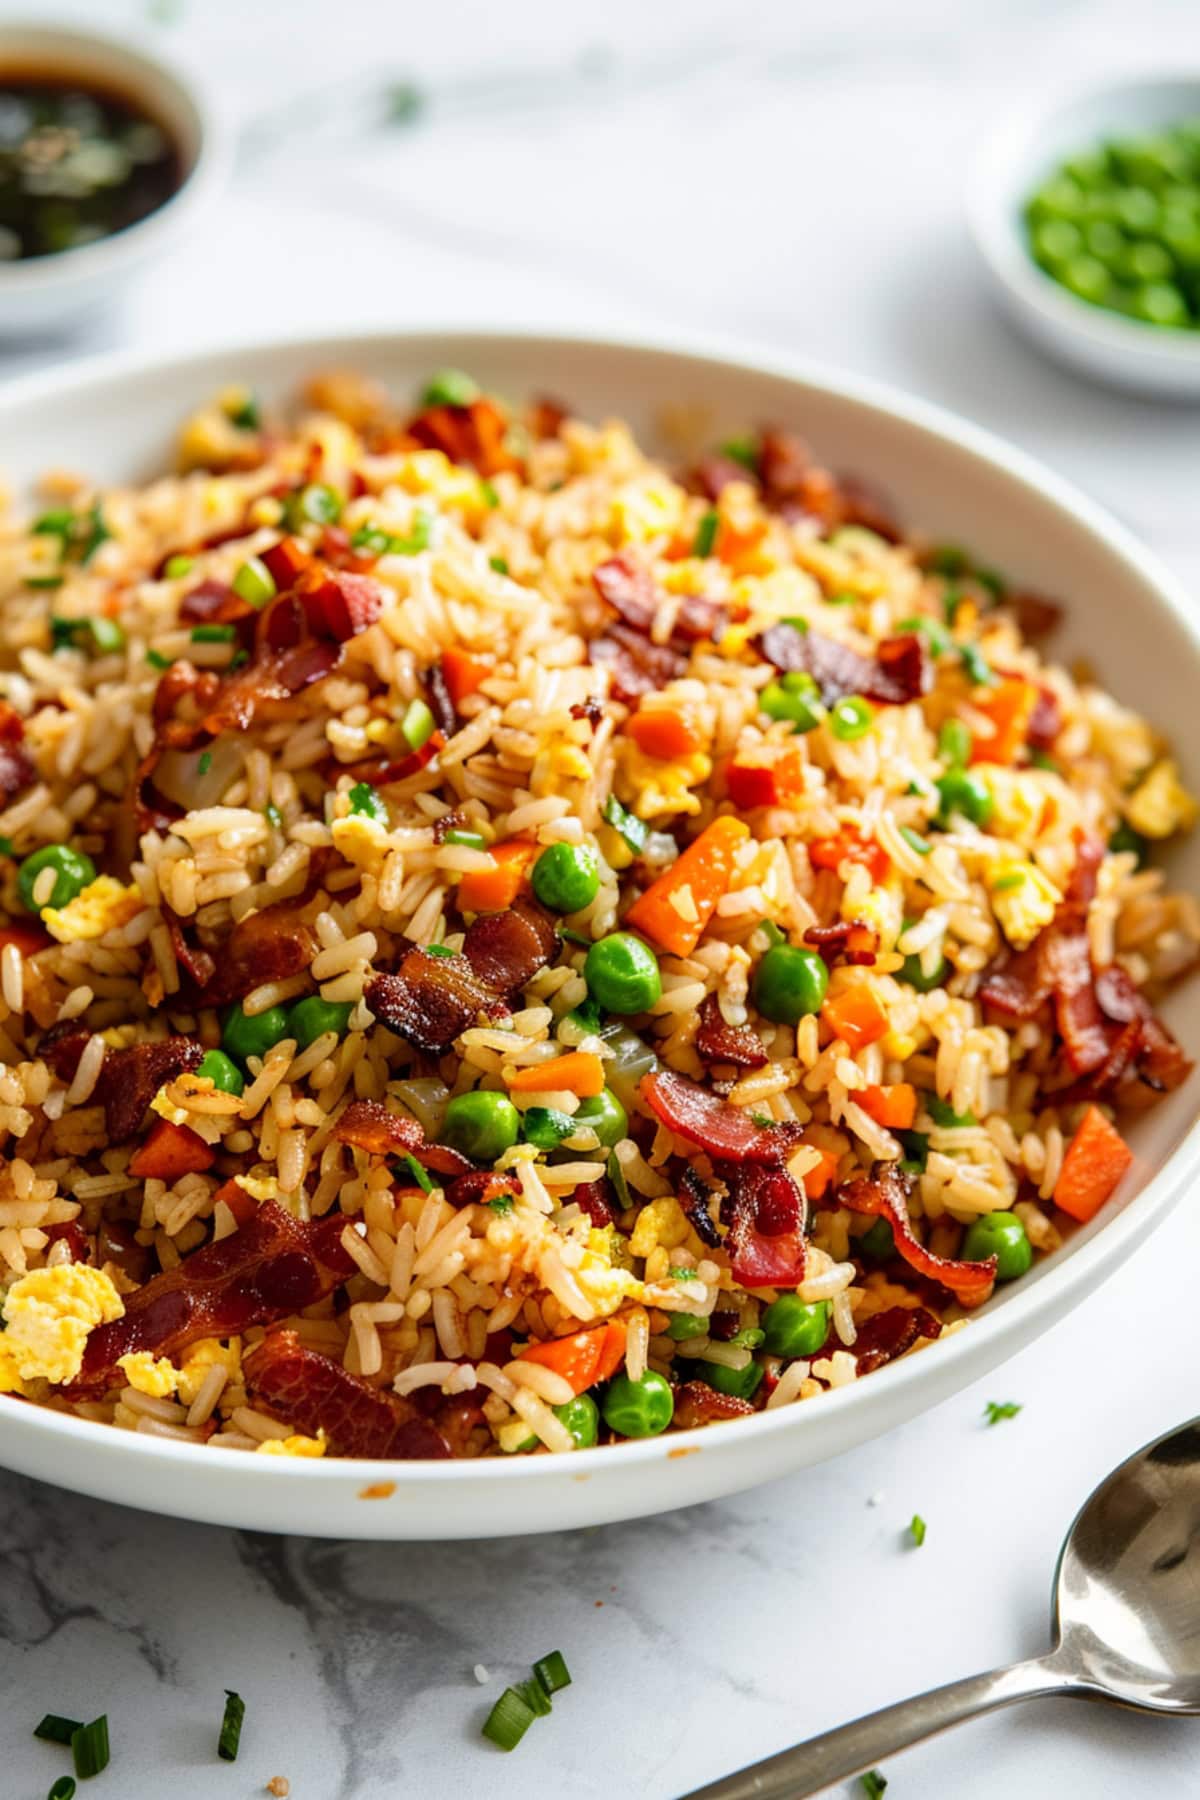 Fried rice with bacon, green peas, carrots in soy sauce served in a white plate.